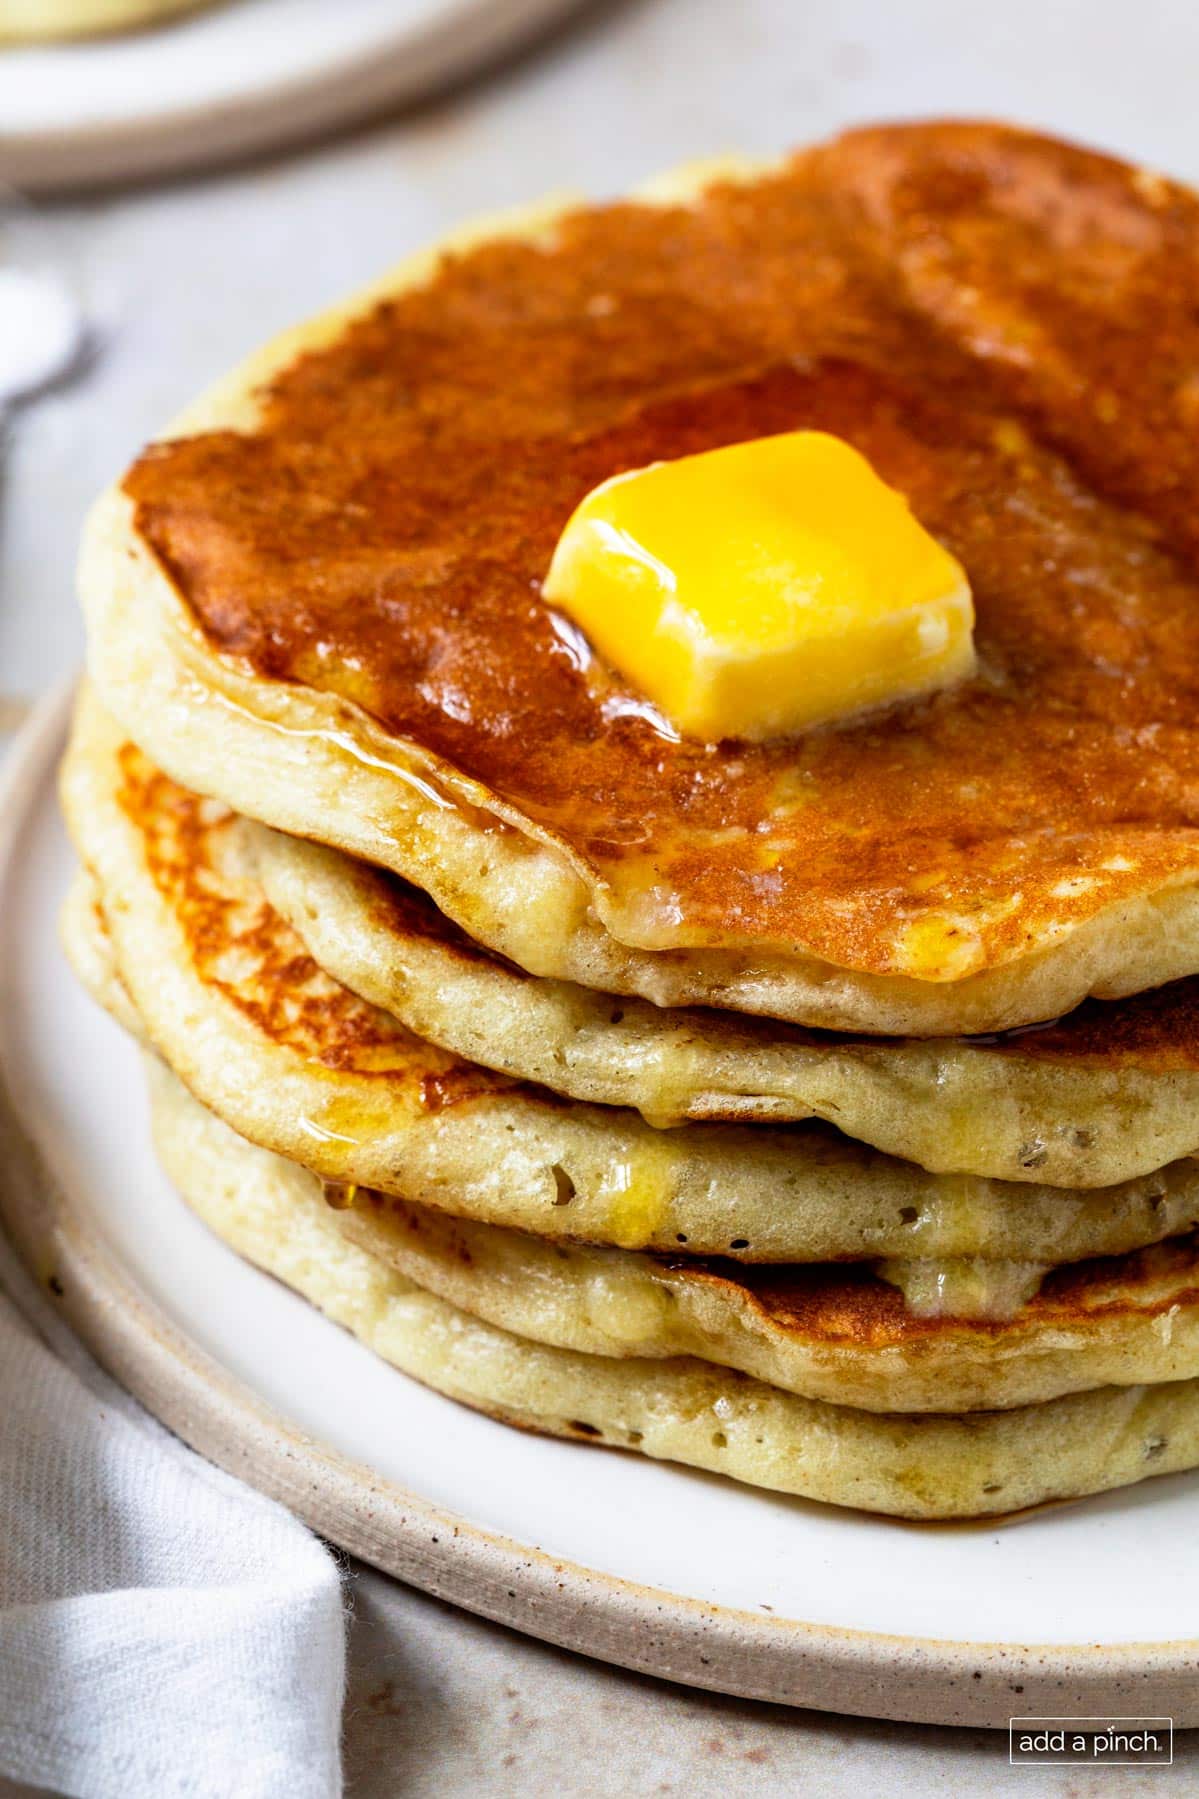 Photo of stack of pancakes topped with butter and syrup on a white plate.